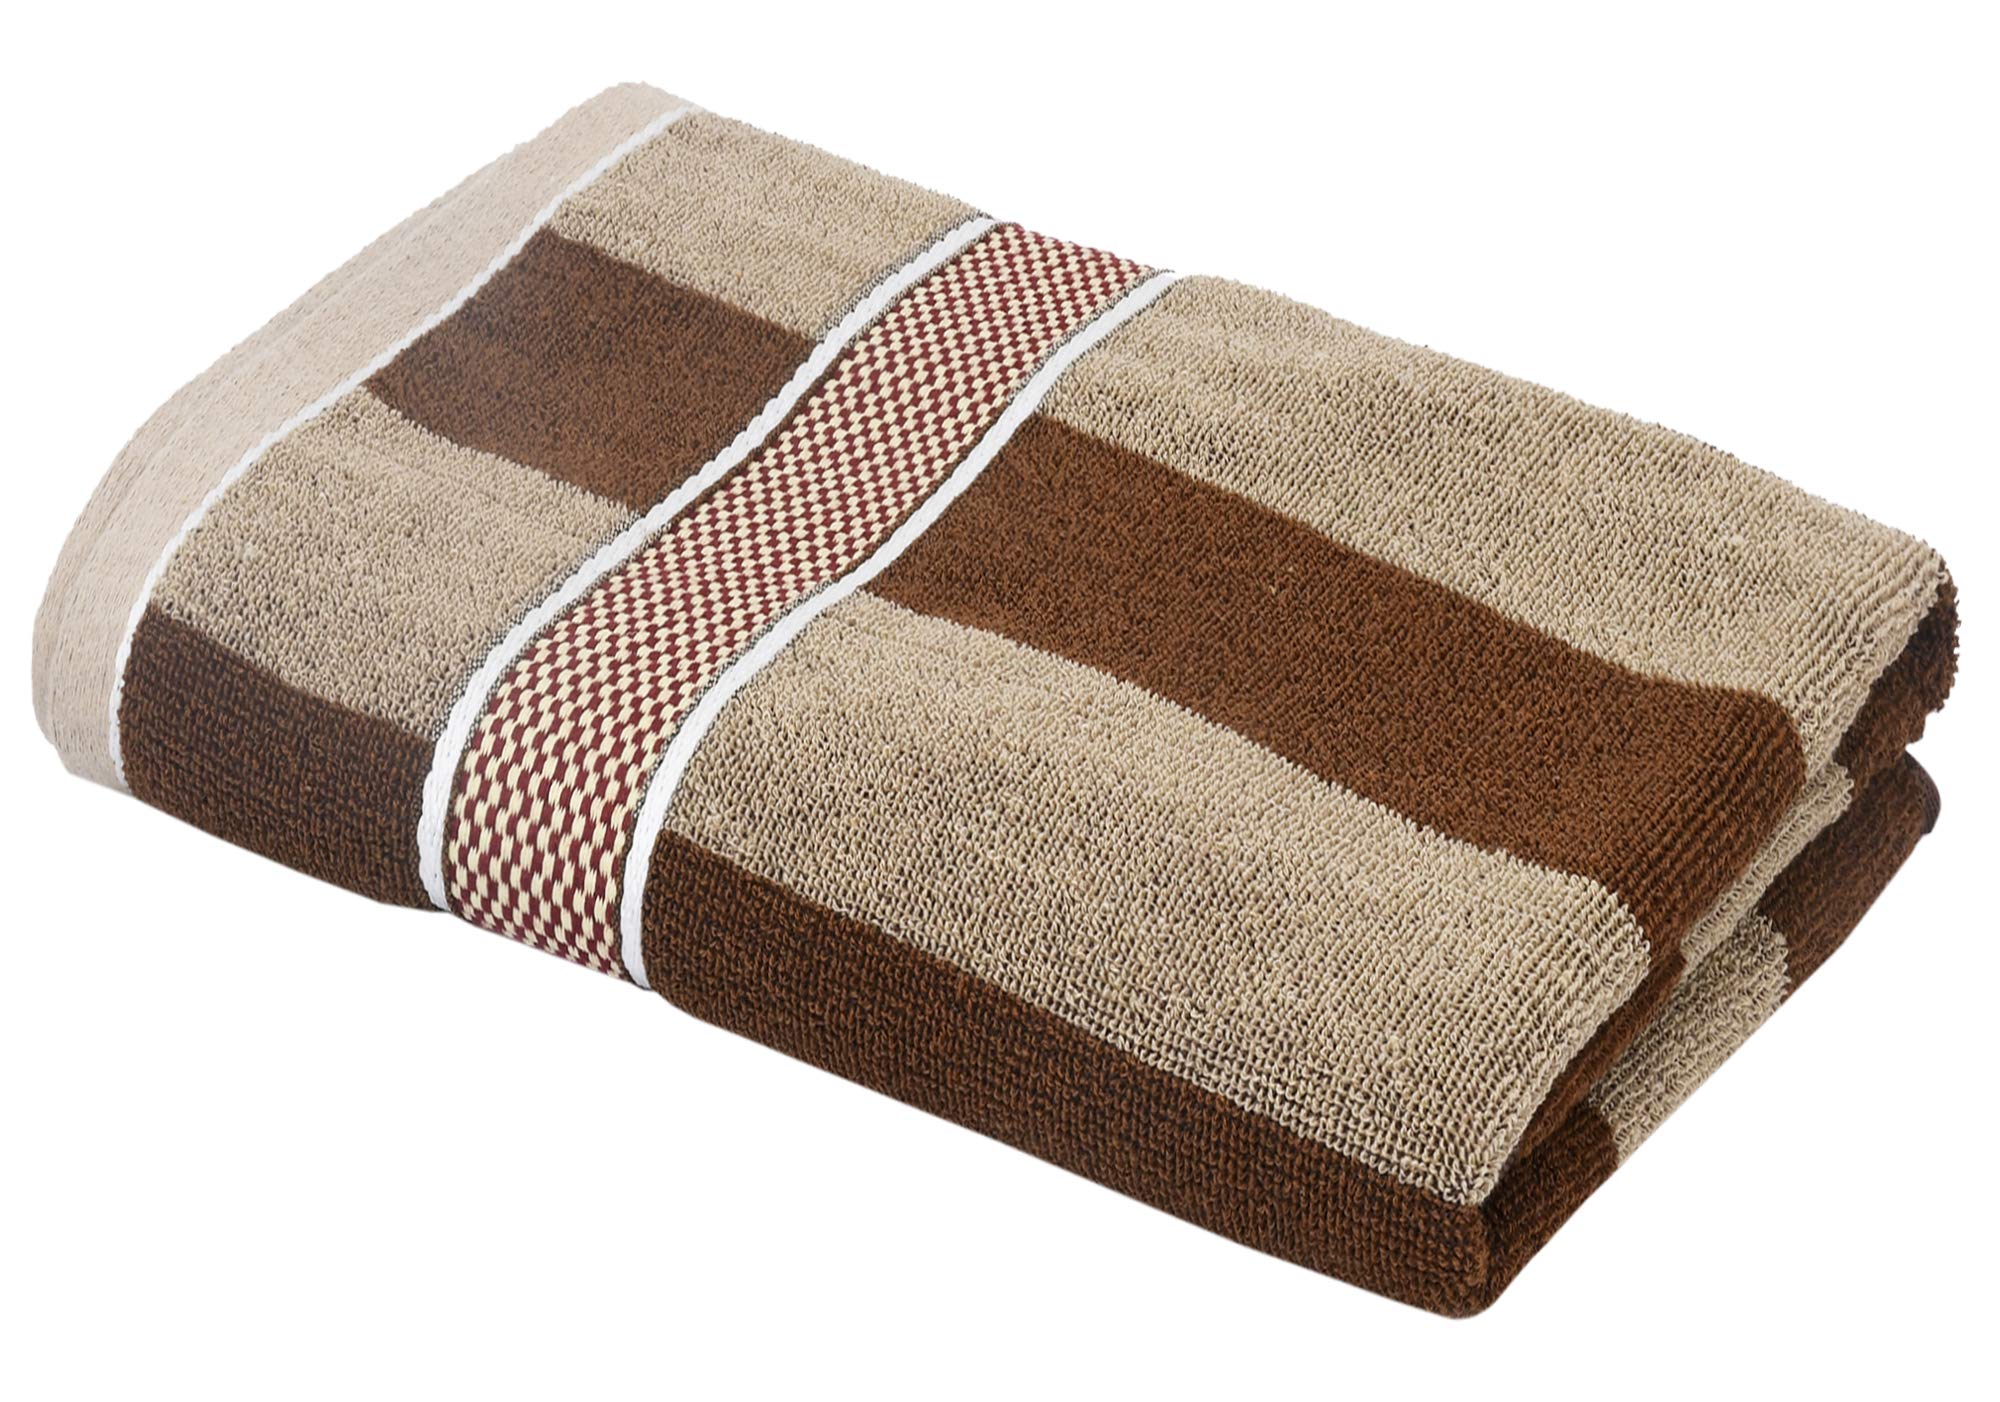 Kuber Industries Cotton 4 Pieces Bath Towel Super Soft, Fluffy, and Absorbent, Perfect for Daily Use 100% Cotton Towels, 500 GSM (Brown)-KUBMART11602, Standard